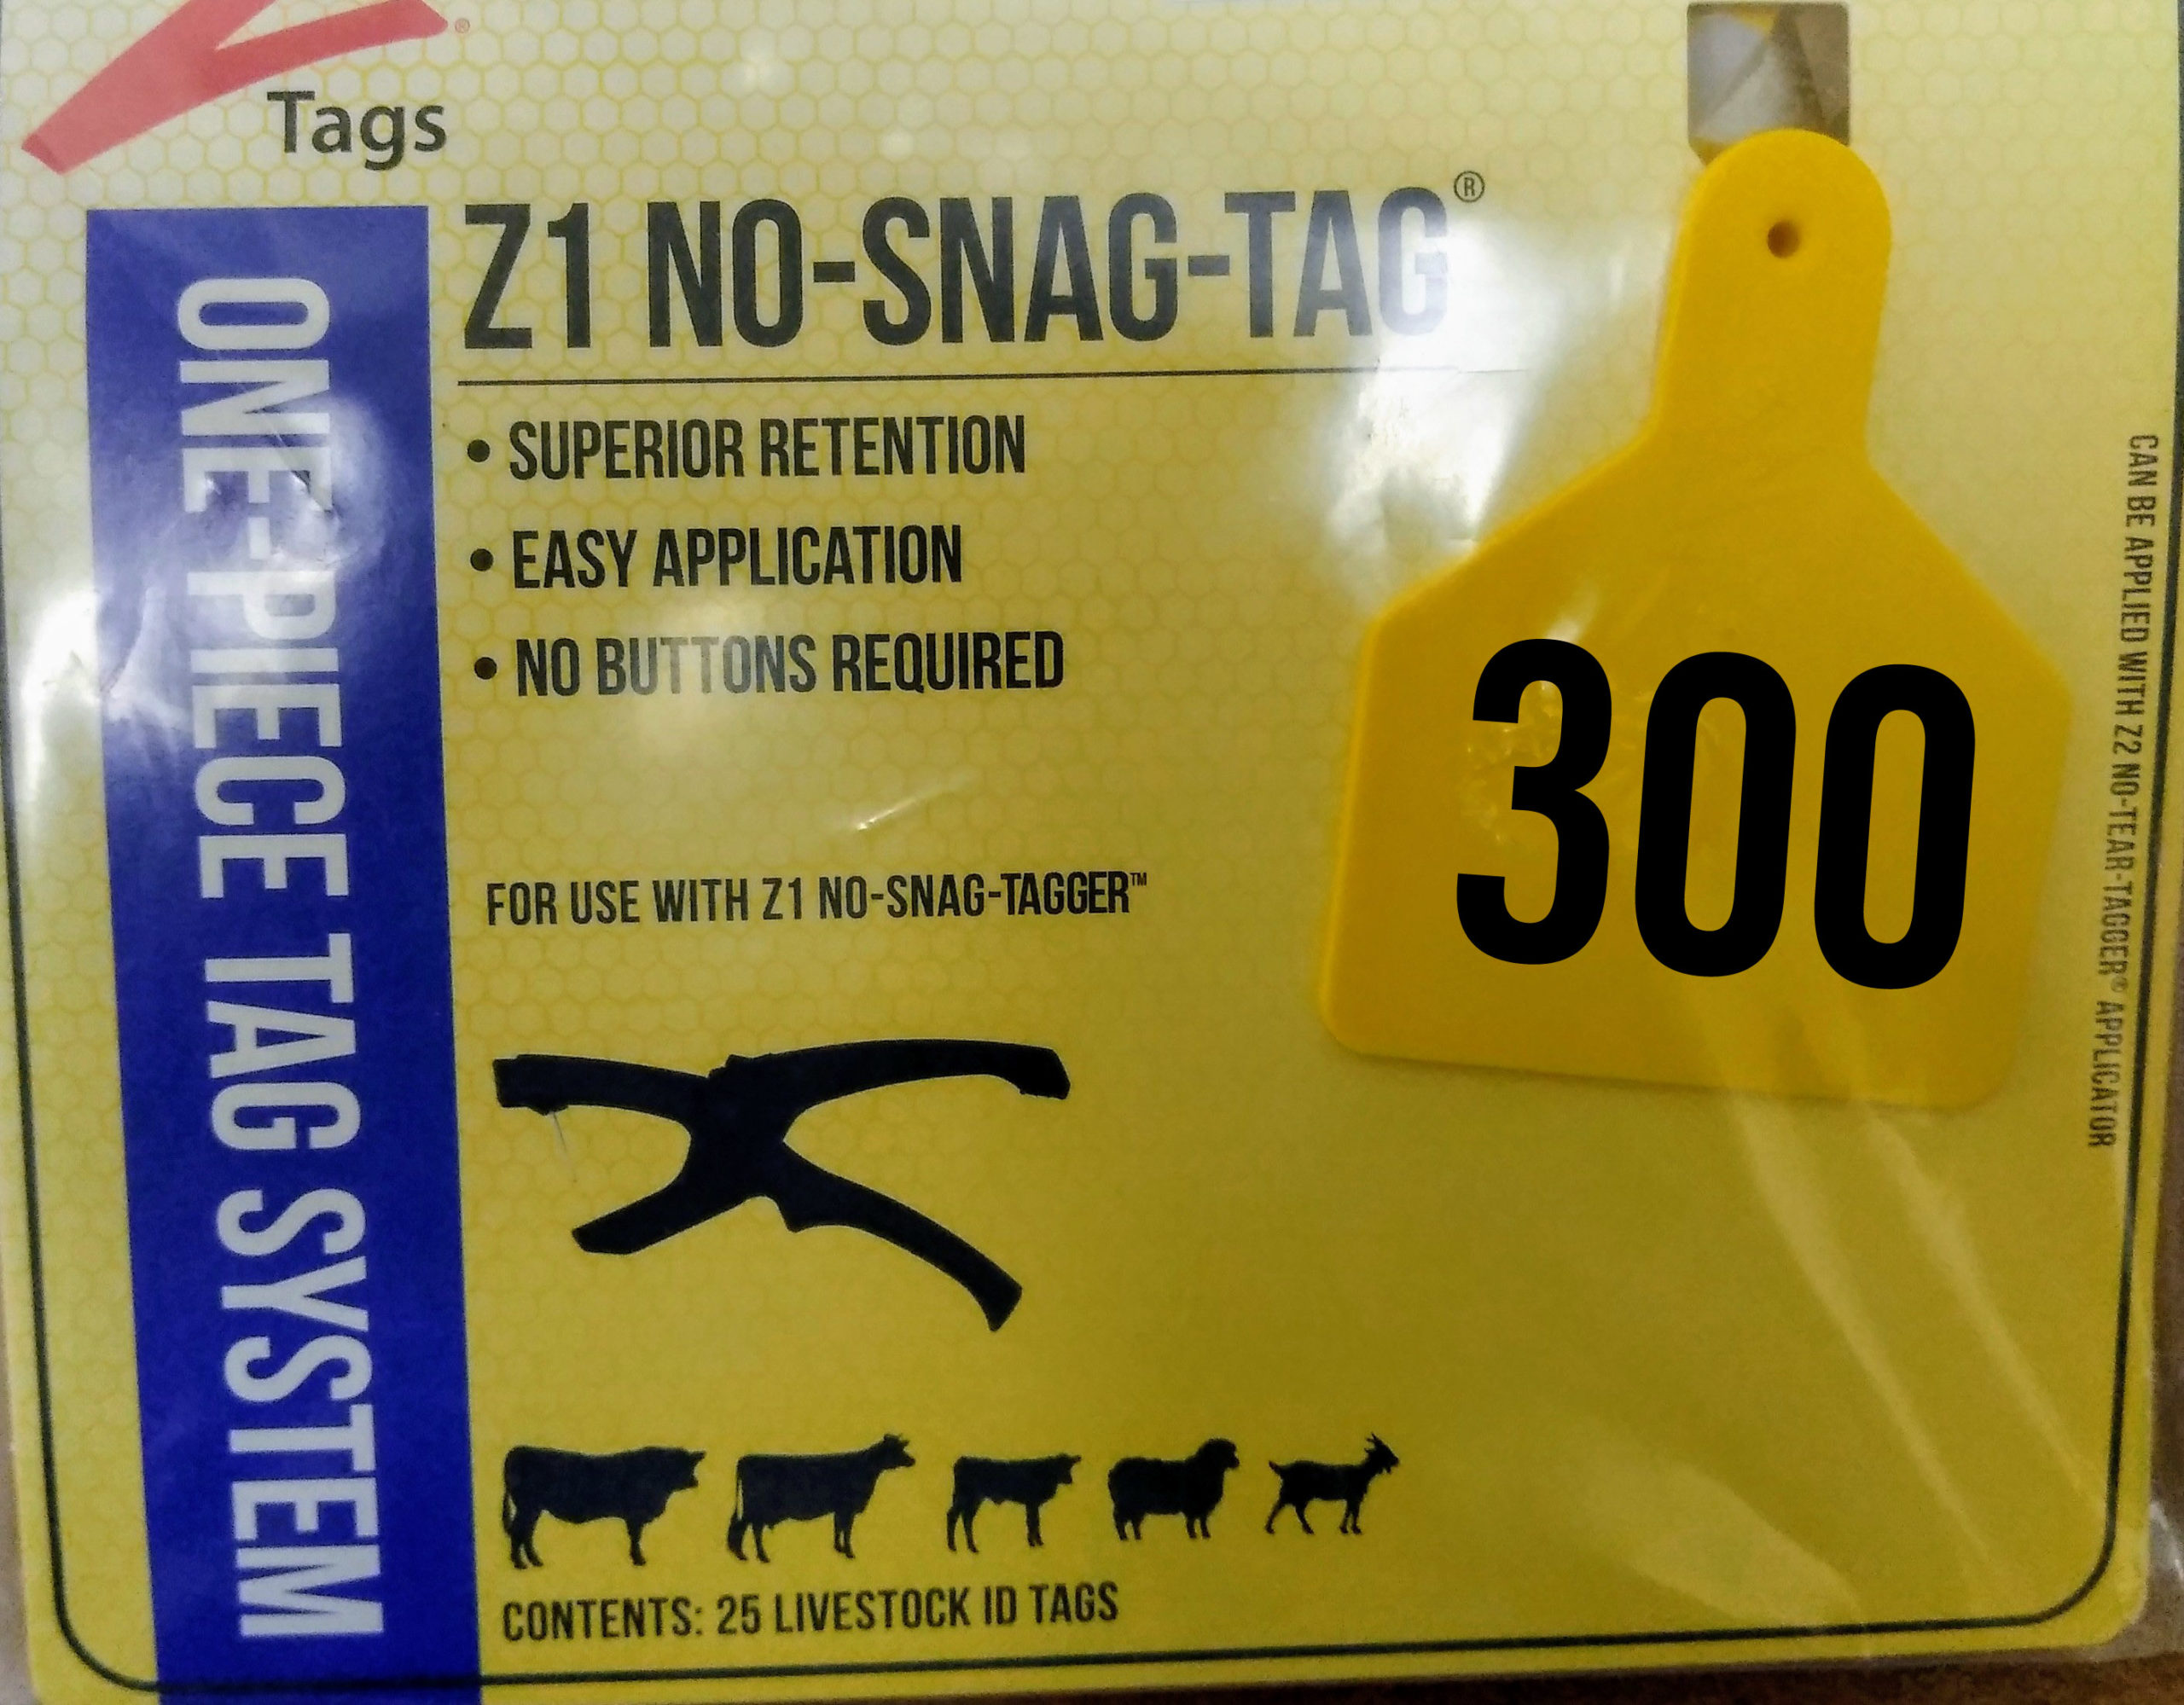 Z Tags Calf Ear Tags WHITE Numbered #26-50 25 Count Easy Application 